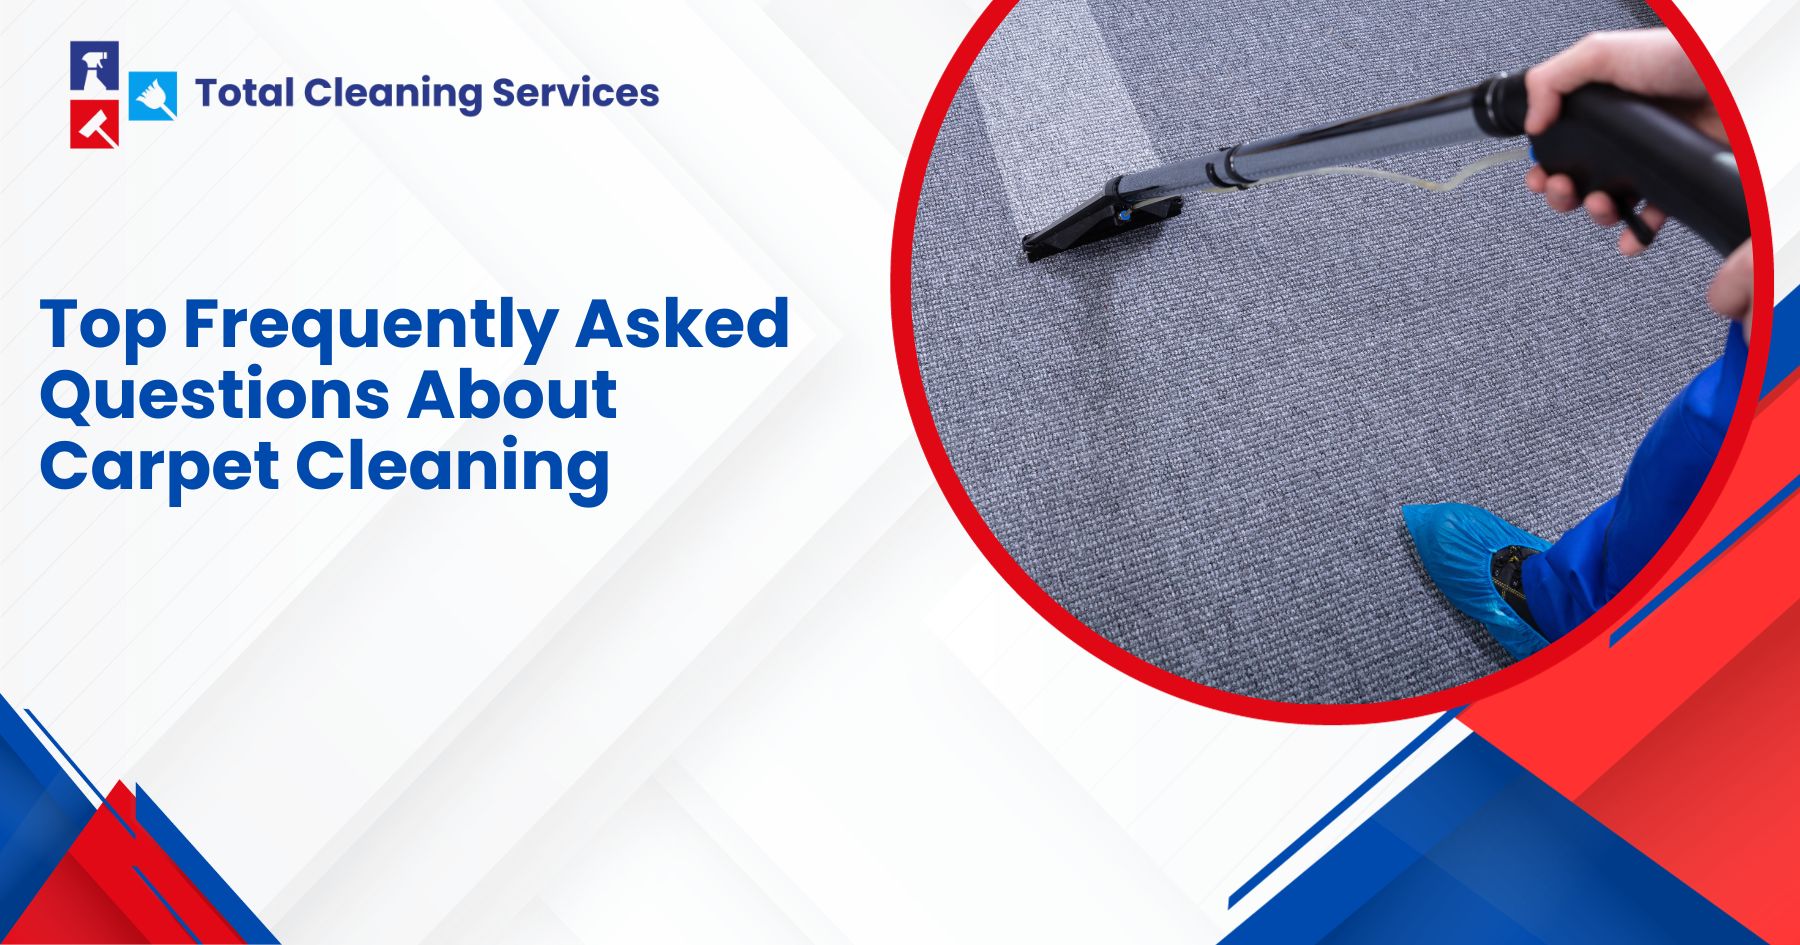 Top Frequently Asked Questions About Carpet Cleaning